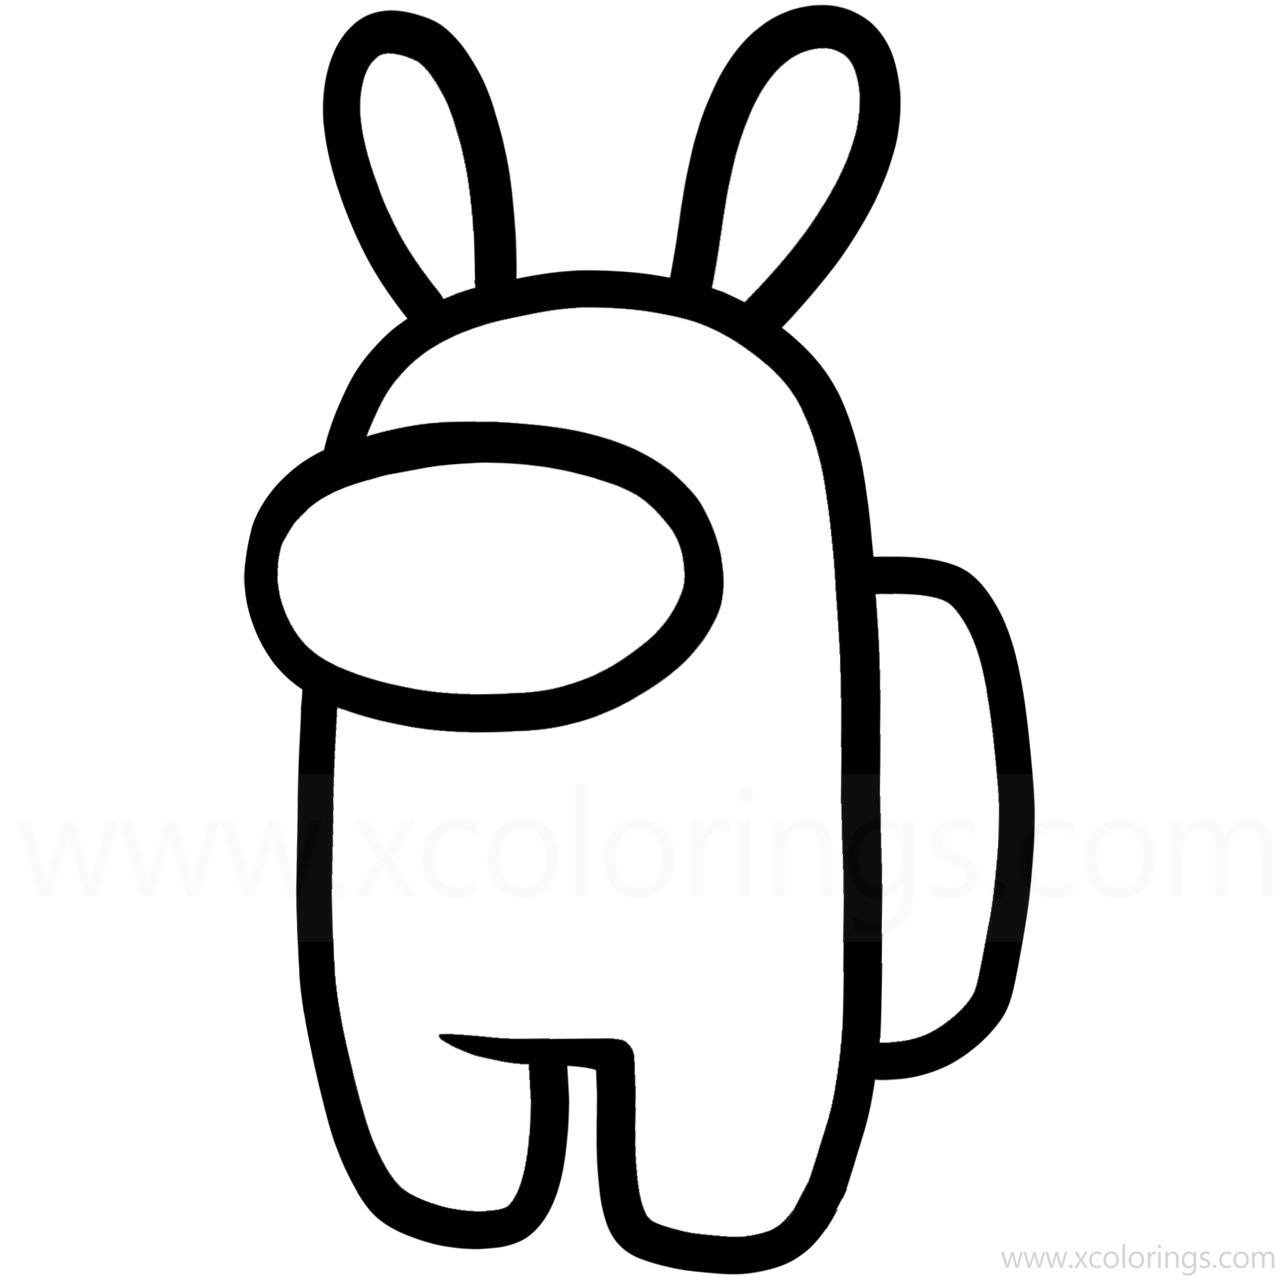 Free Among Us Coloring Pages Bunny Character printable